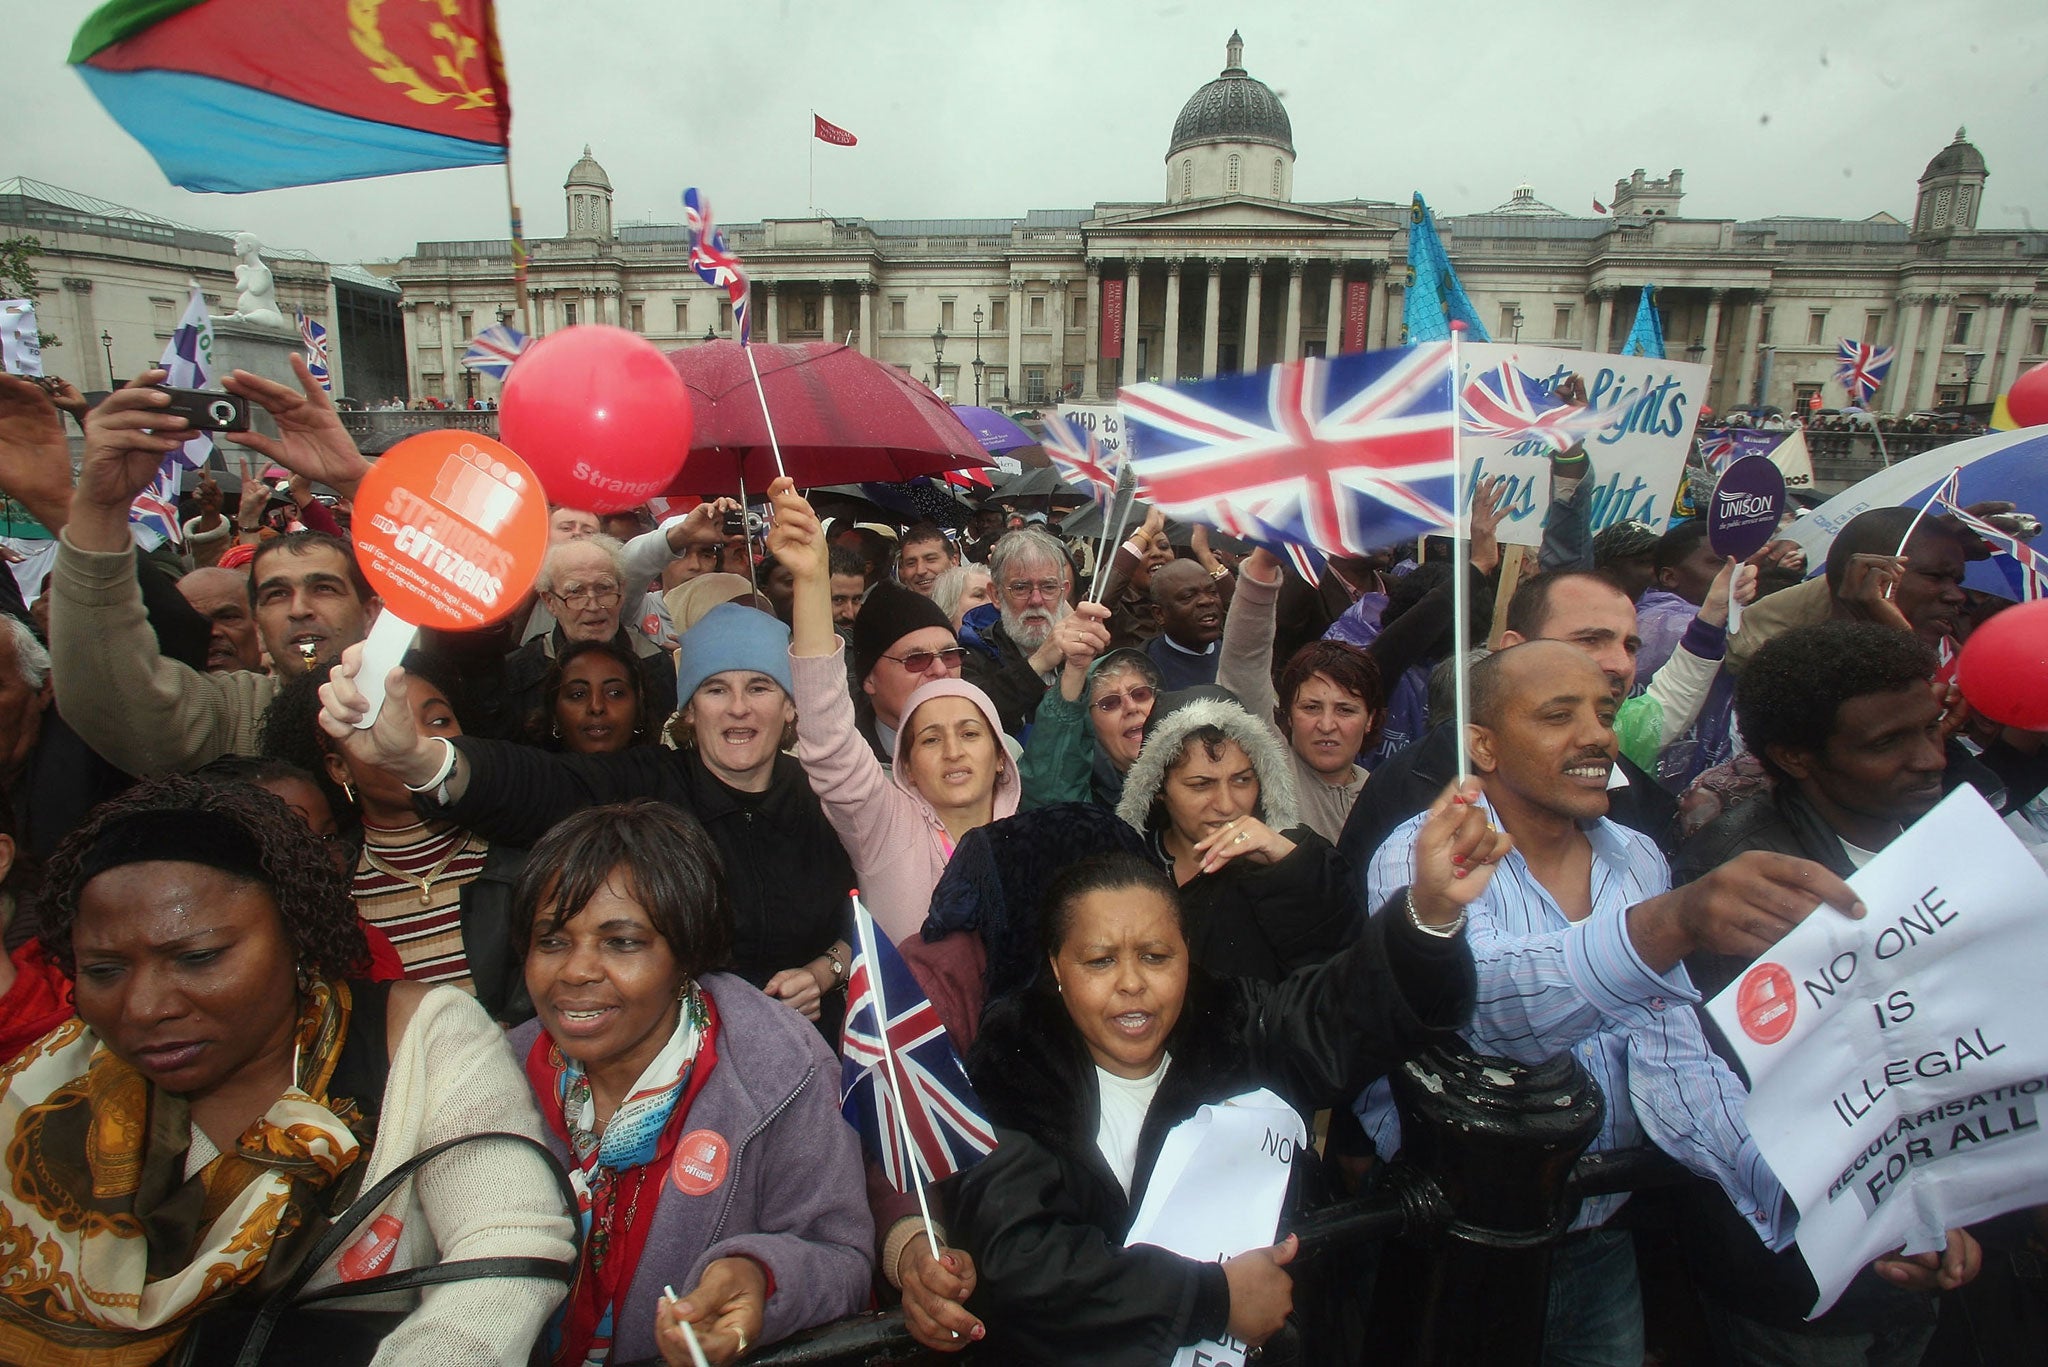 Protestors cheer, wave flags and banners during a march hoping to draw attention to claims of exploitation and discrimination of migrant workers